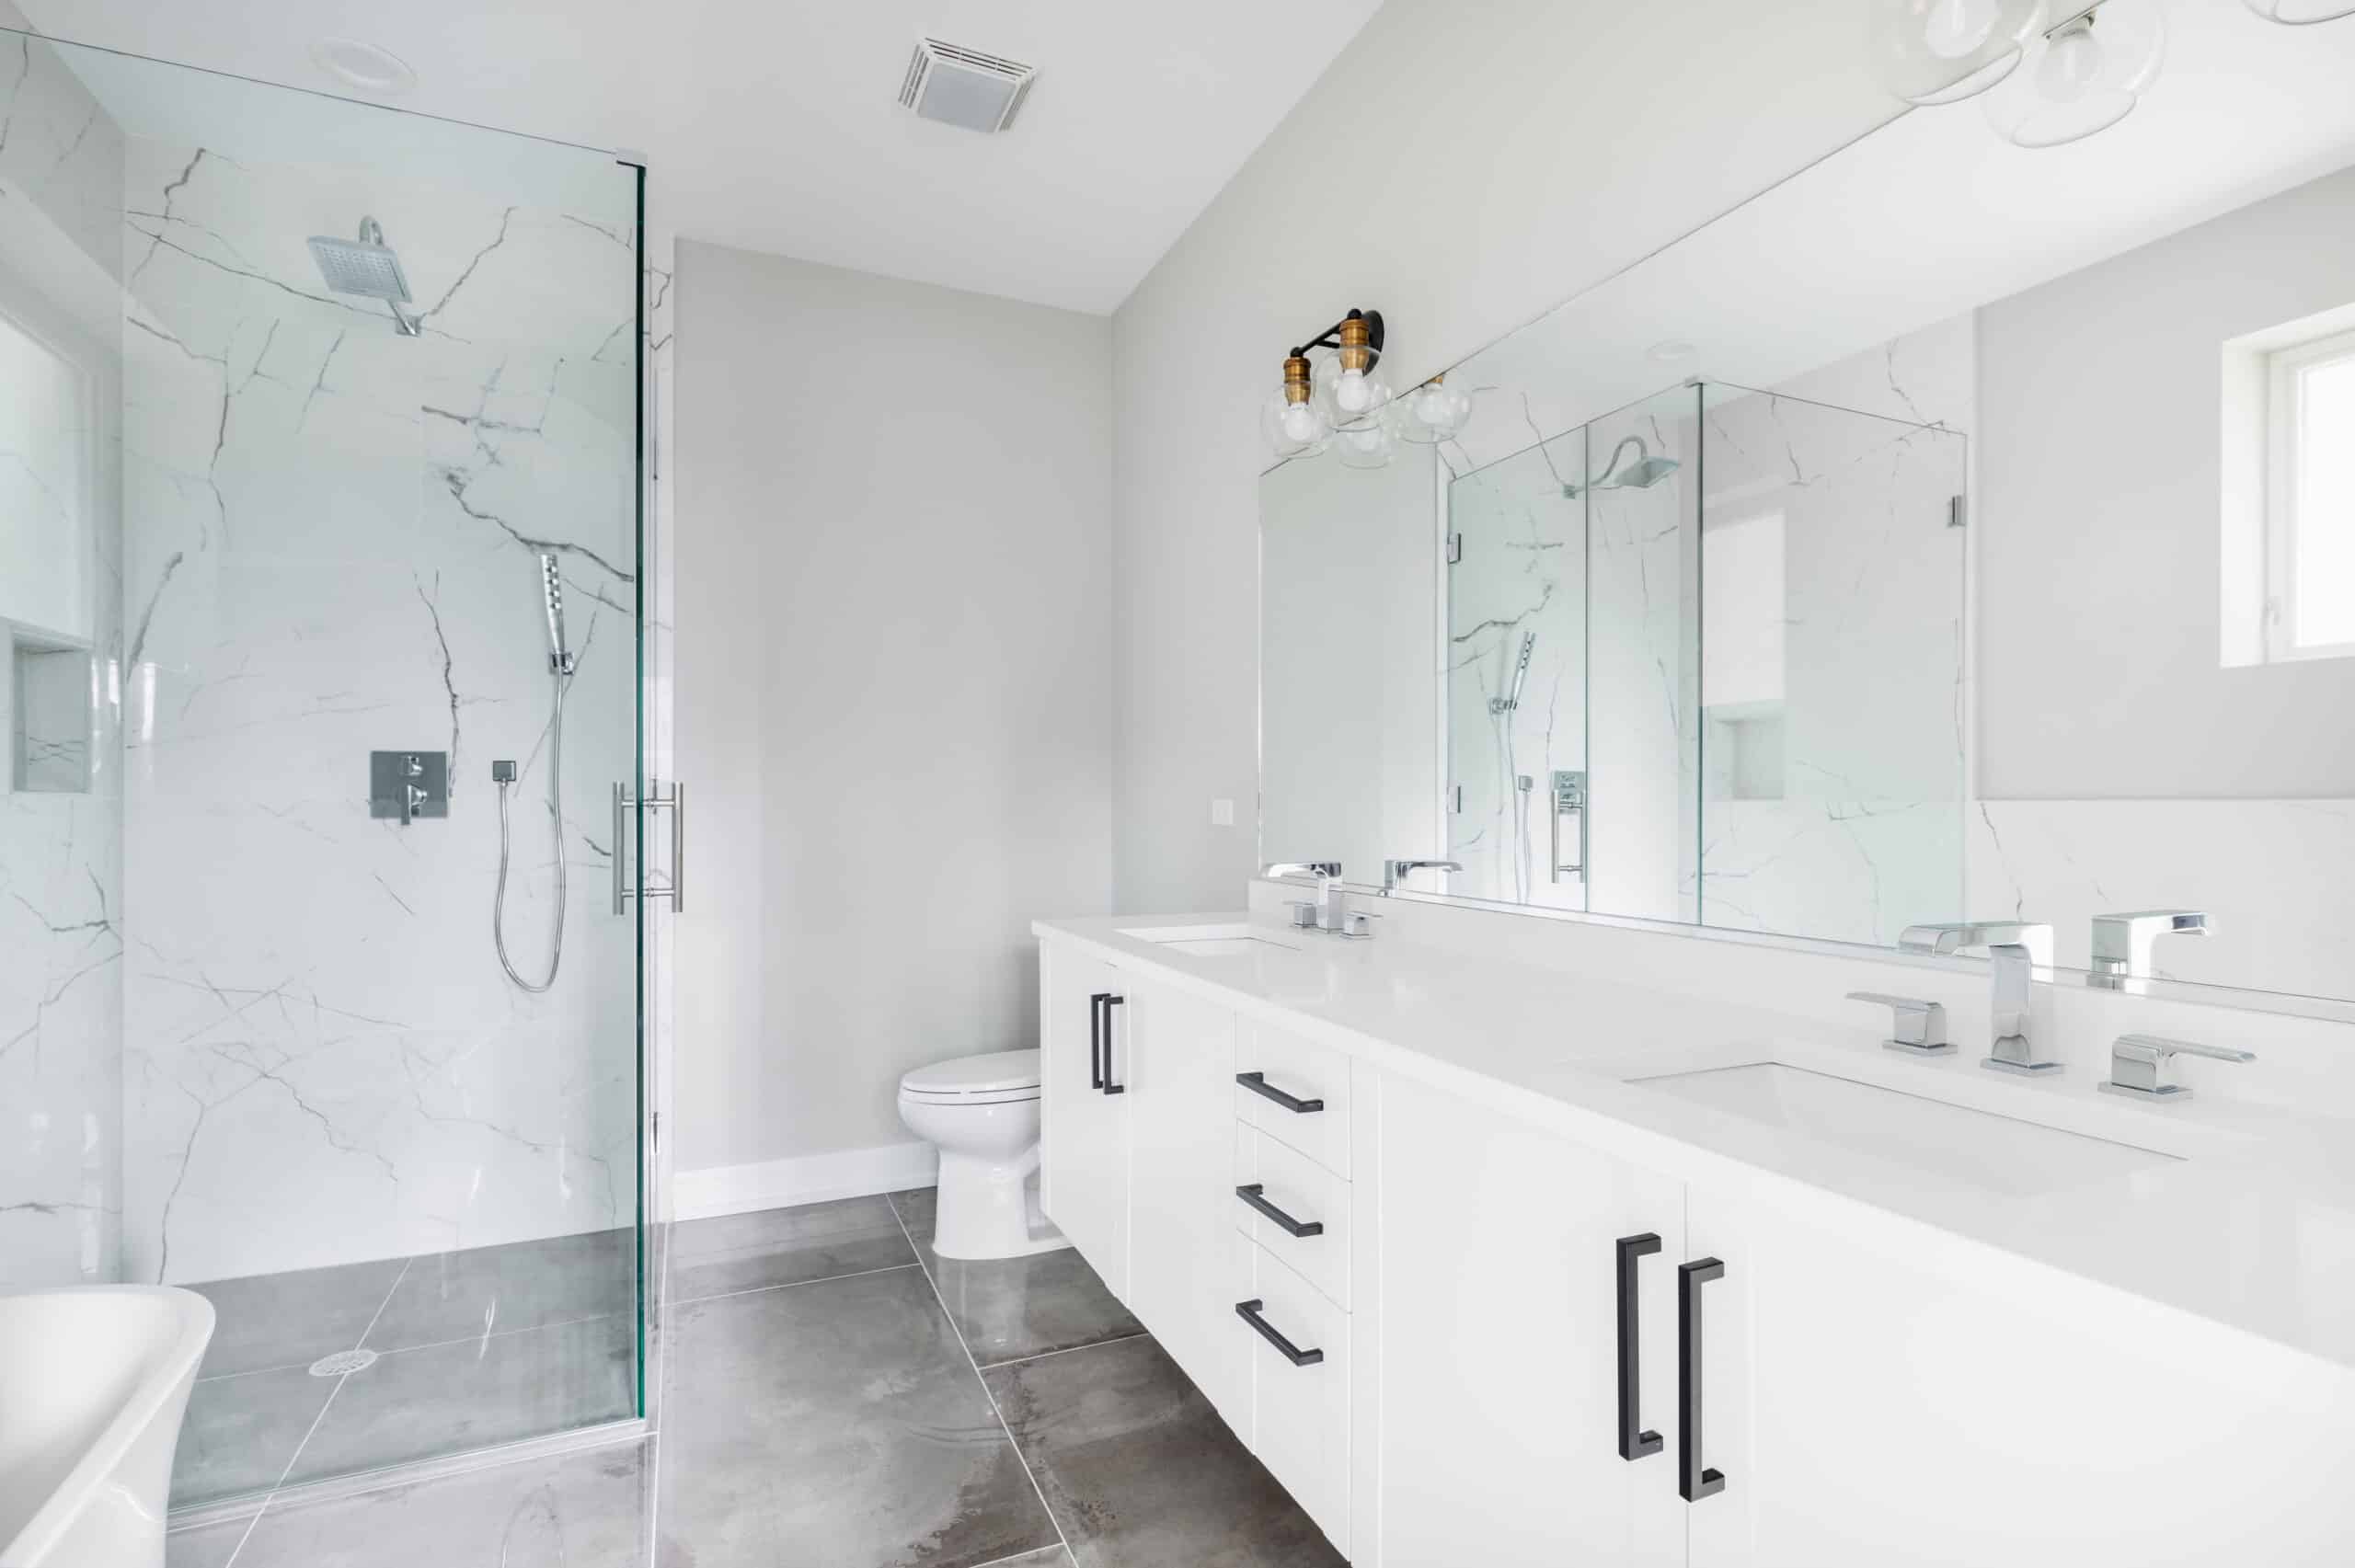 A modern, white luxury bathroom with black hardware and chrome f